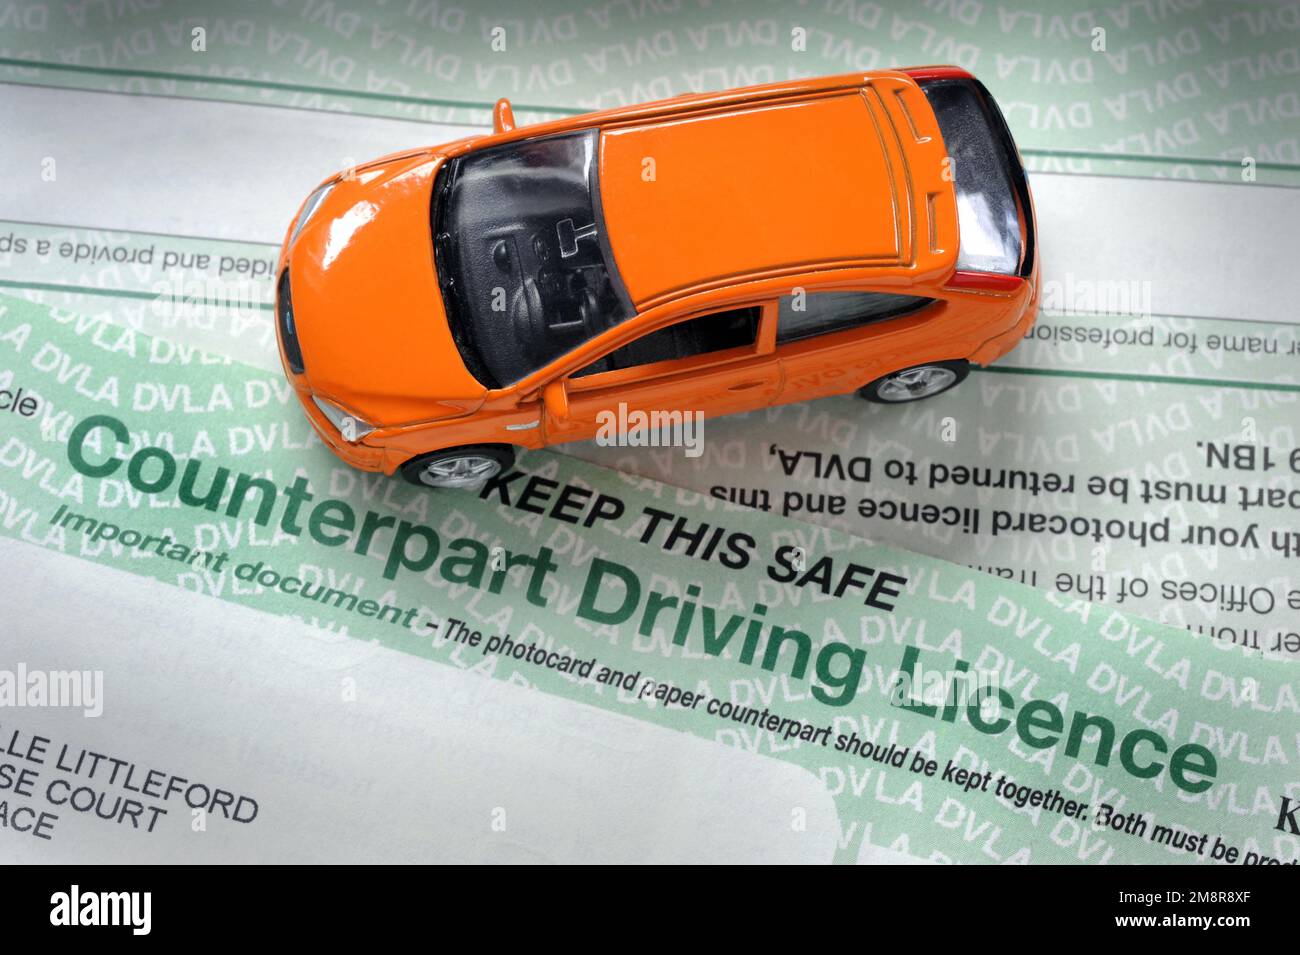 MODEL CAR WITH PAPER COUNTERPART DRIVING LICENCE RE DVLA DRIVERS DRIVING FINES PENALTY POINTS ETC UK Stock Photo